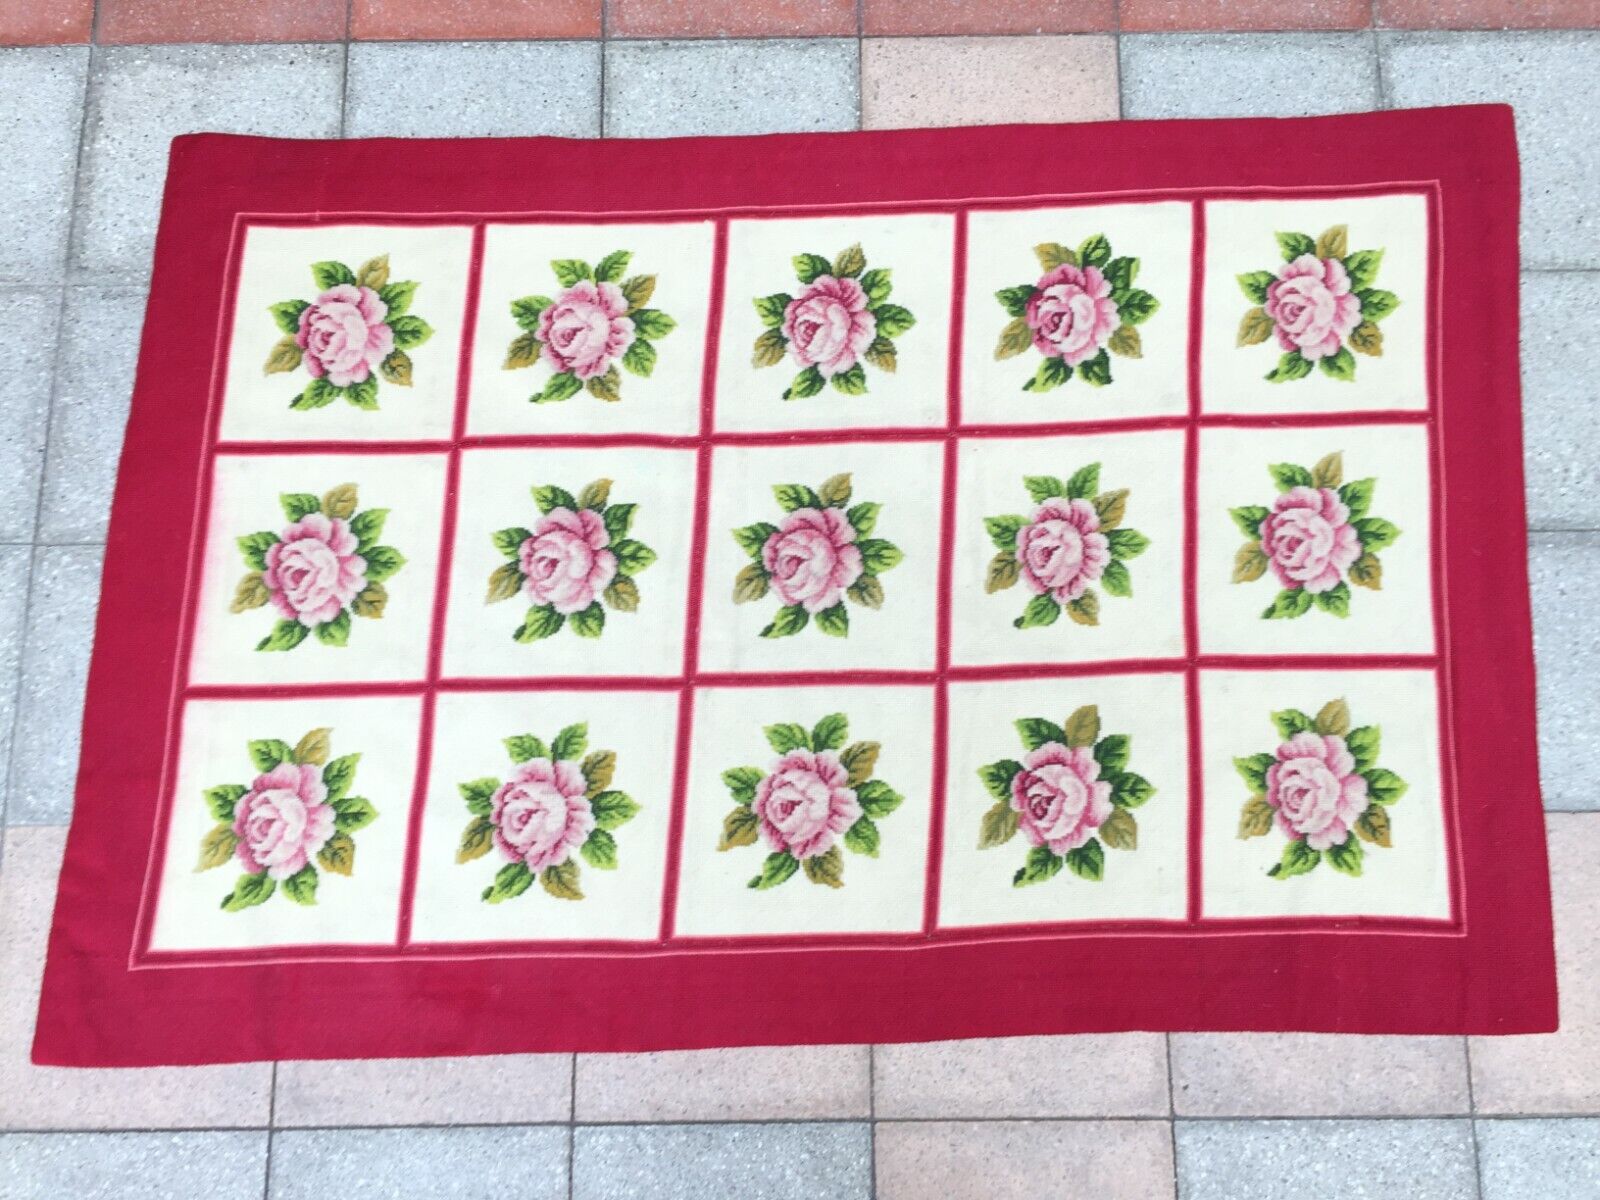 Close-up of the central grid pattern with needlepoint stitched pink roses and green leaves